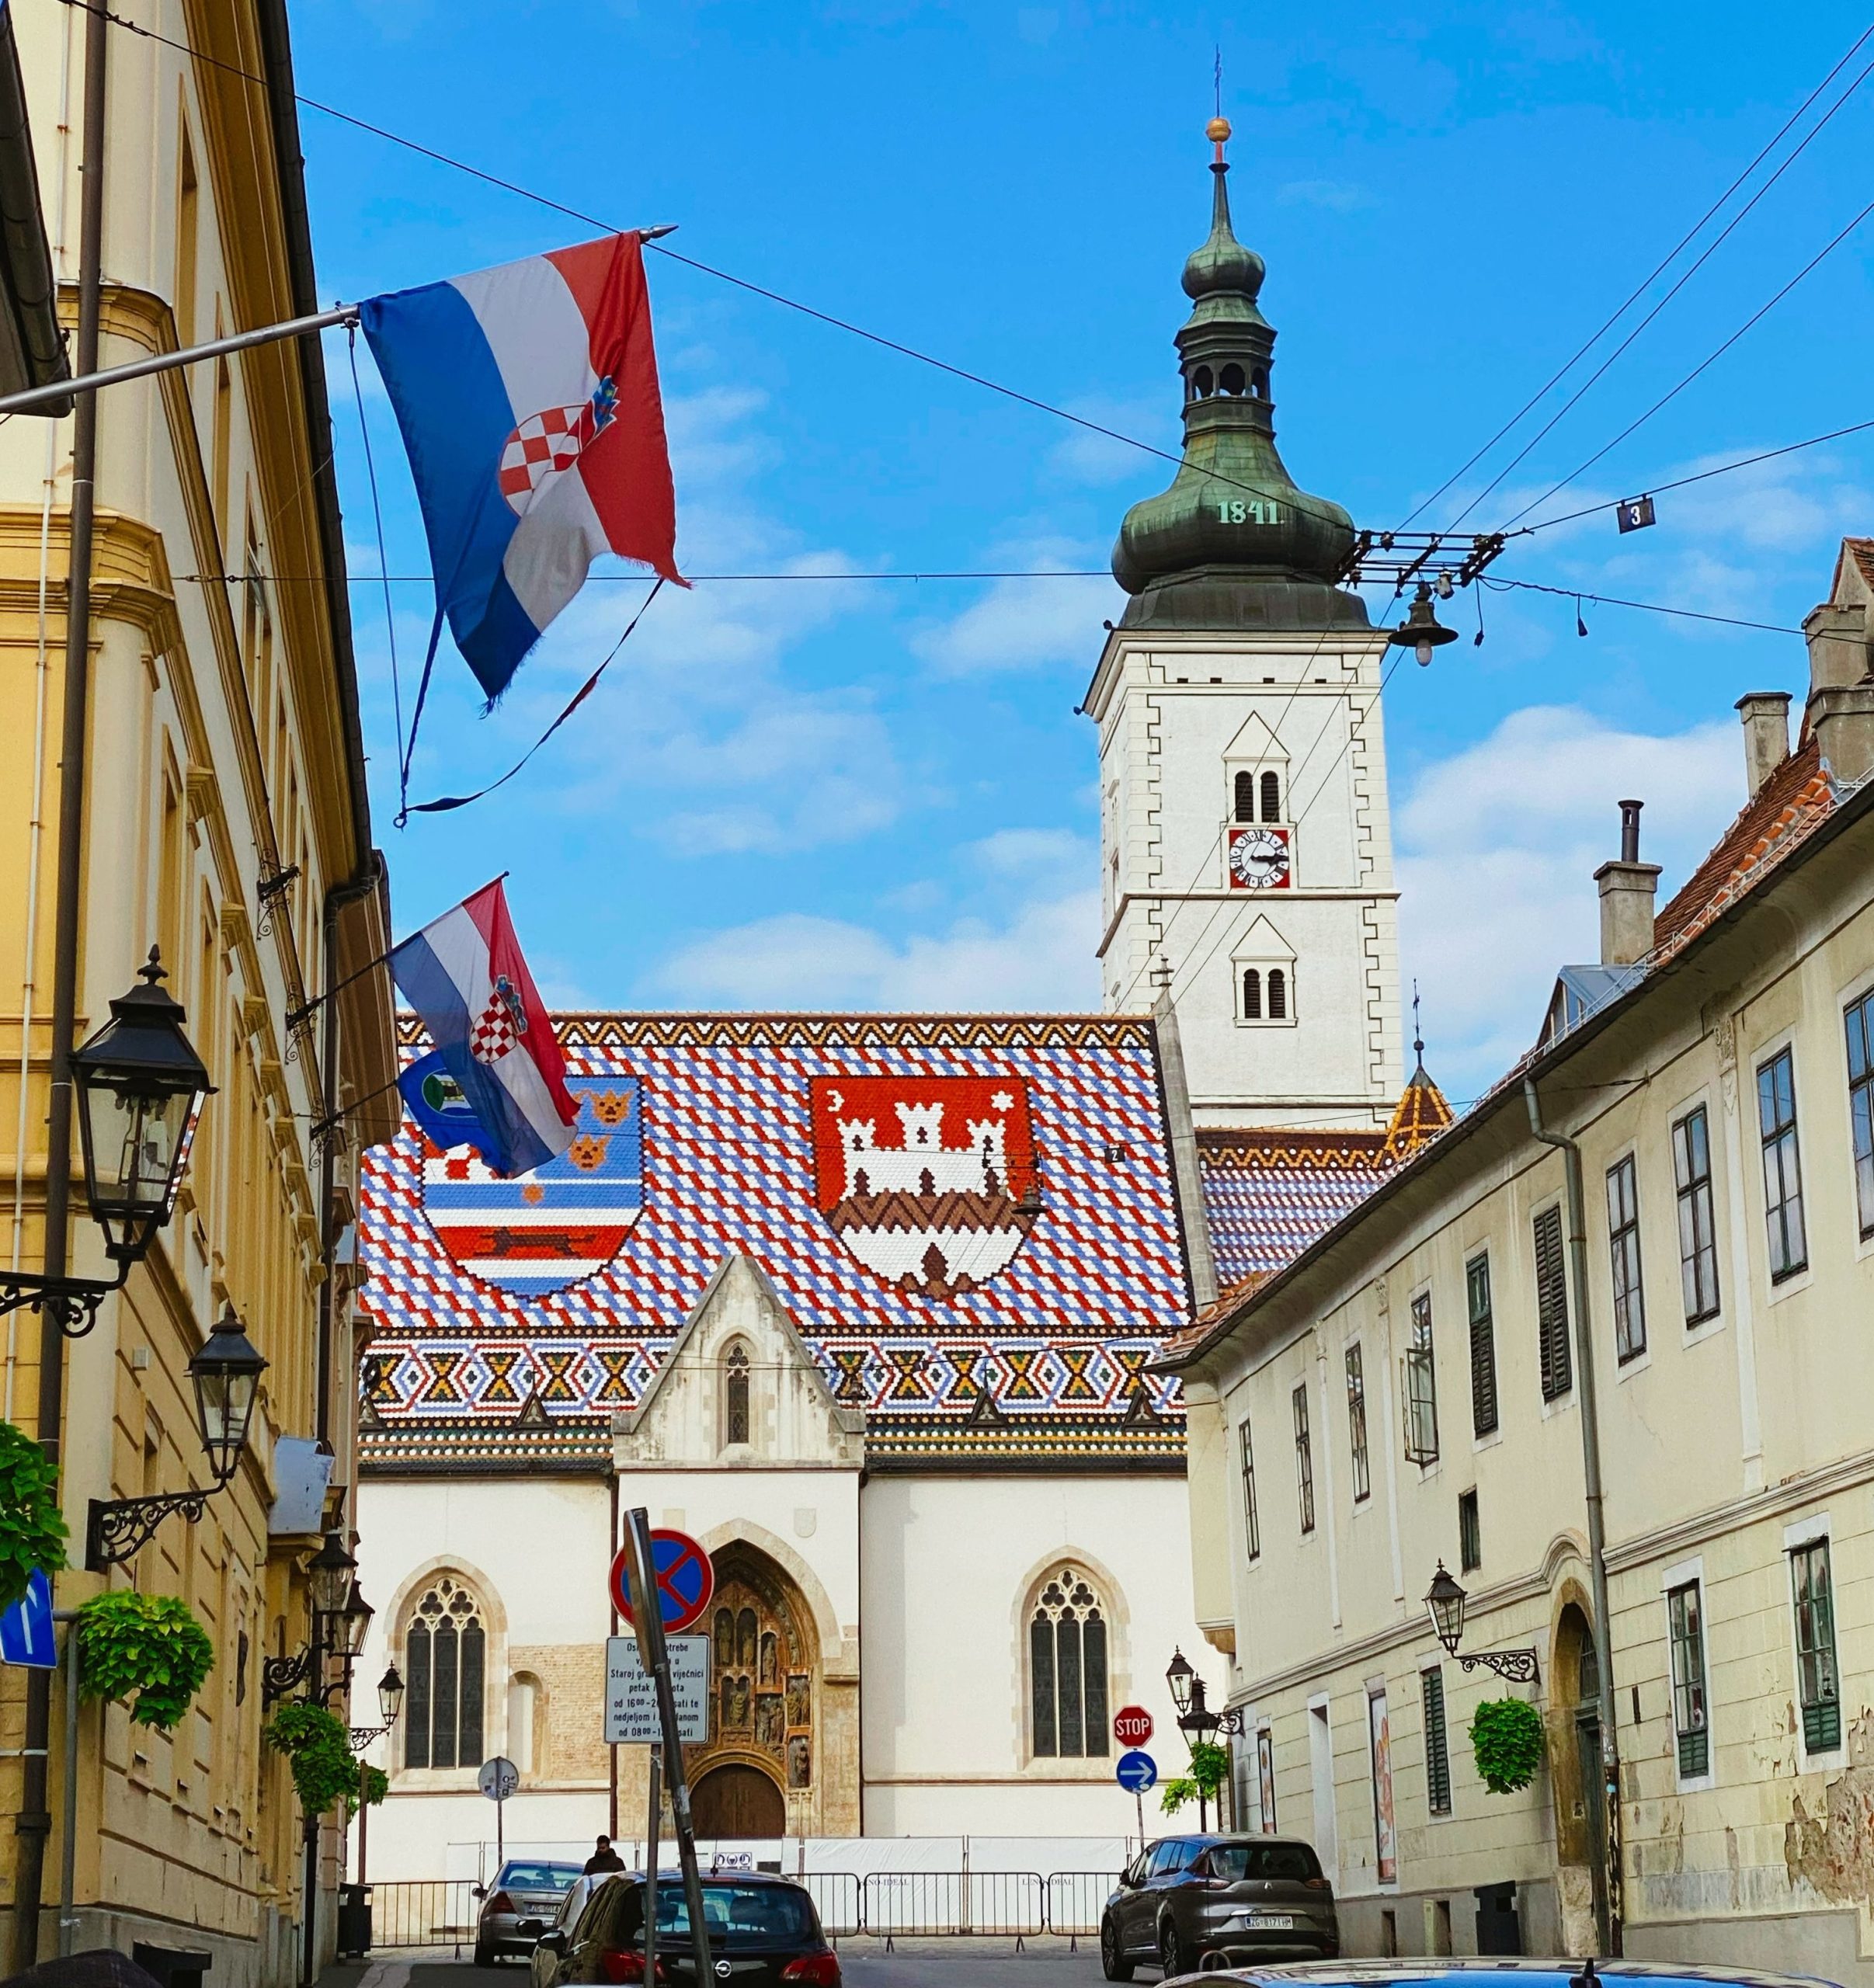 Connecting the Doers: Taking Croatia to the Next Level - ACAP bringing conference to Croatia for first time